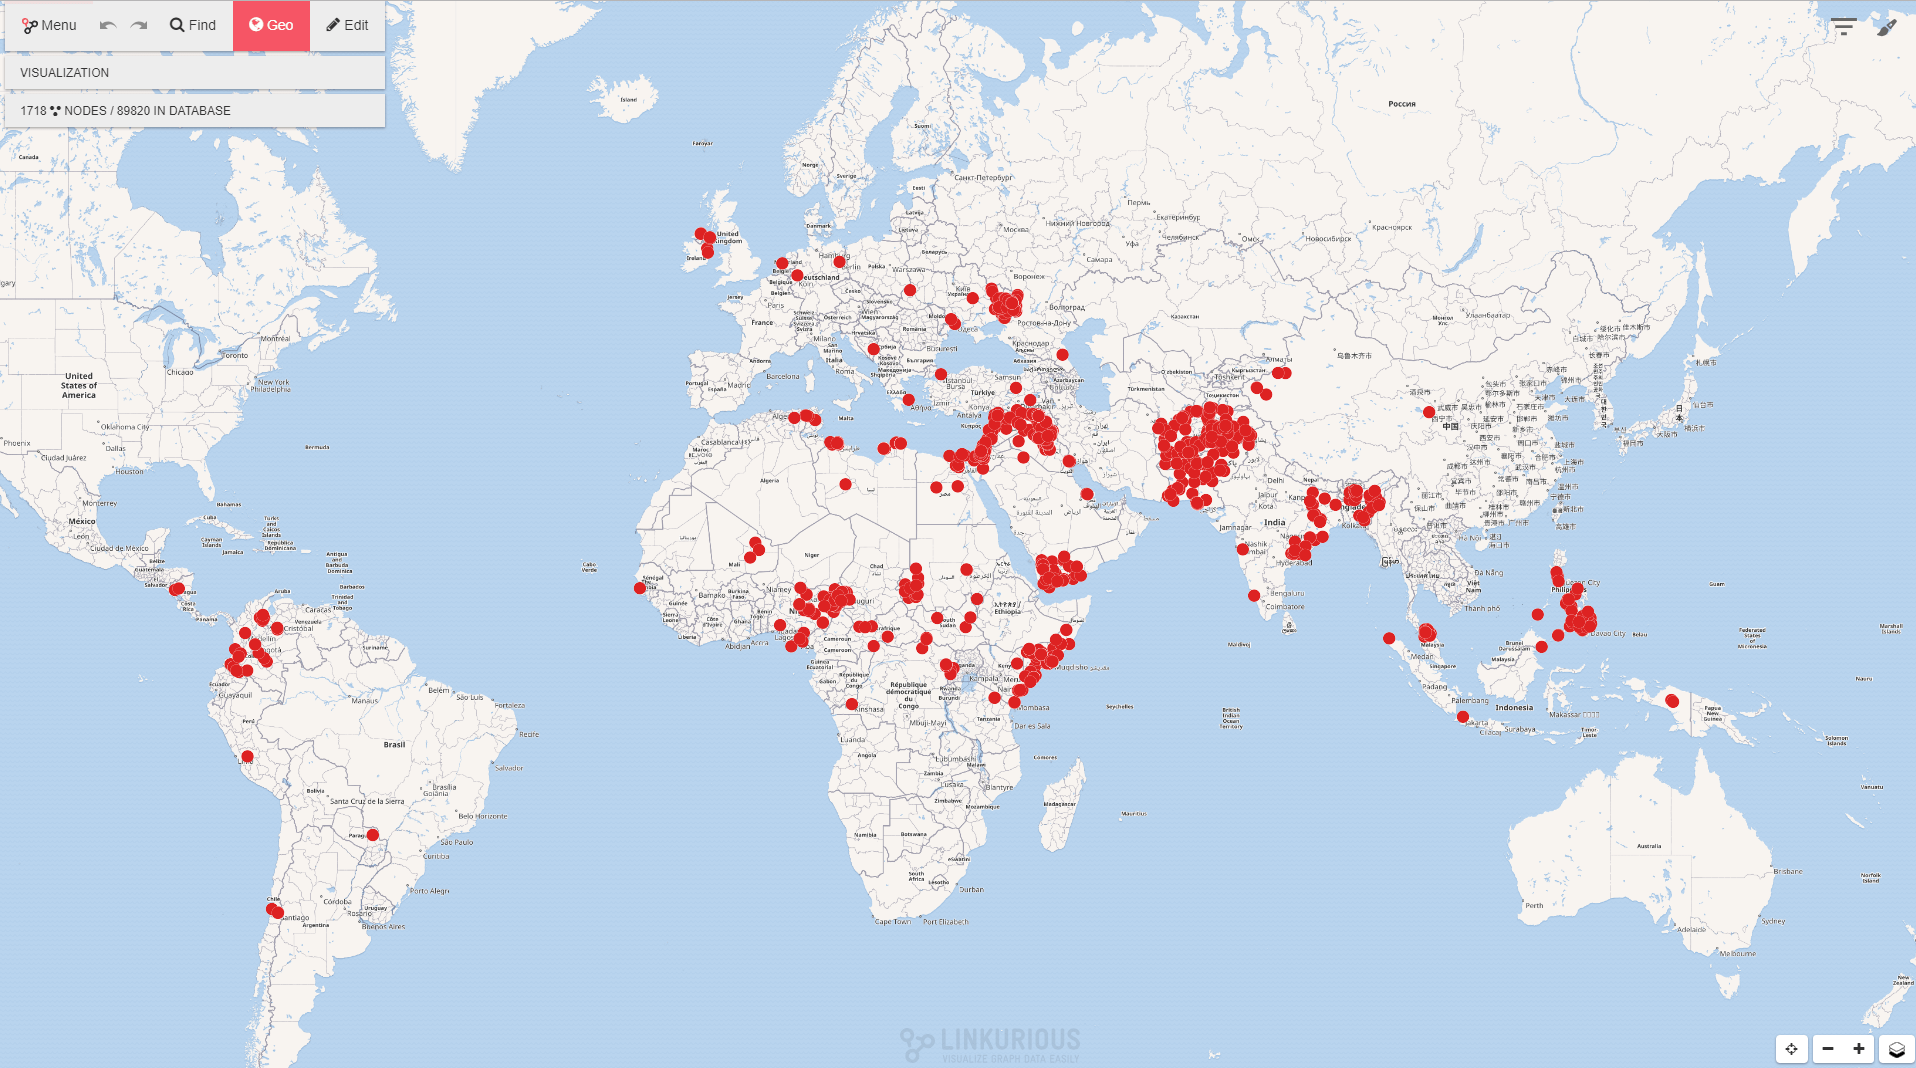 A geo-visualization of the 1731 events reported in July 2014.